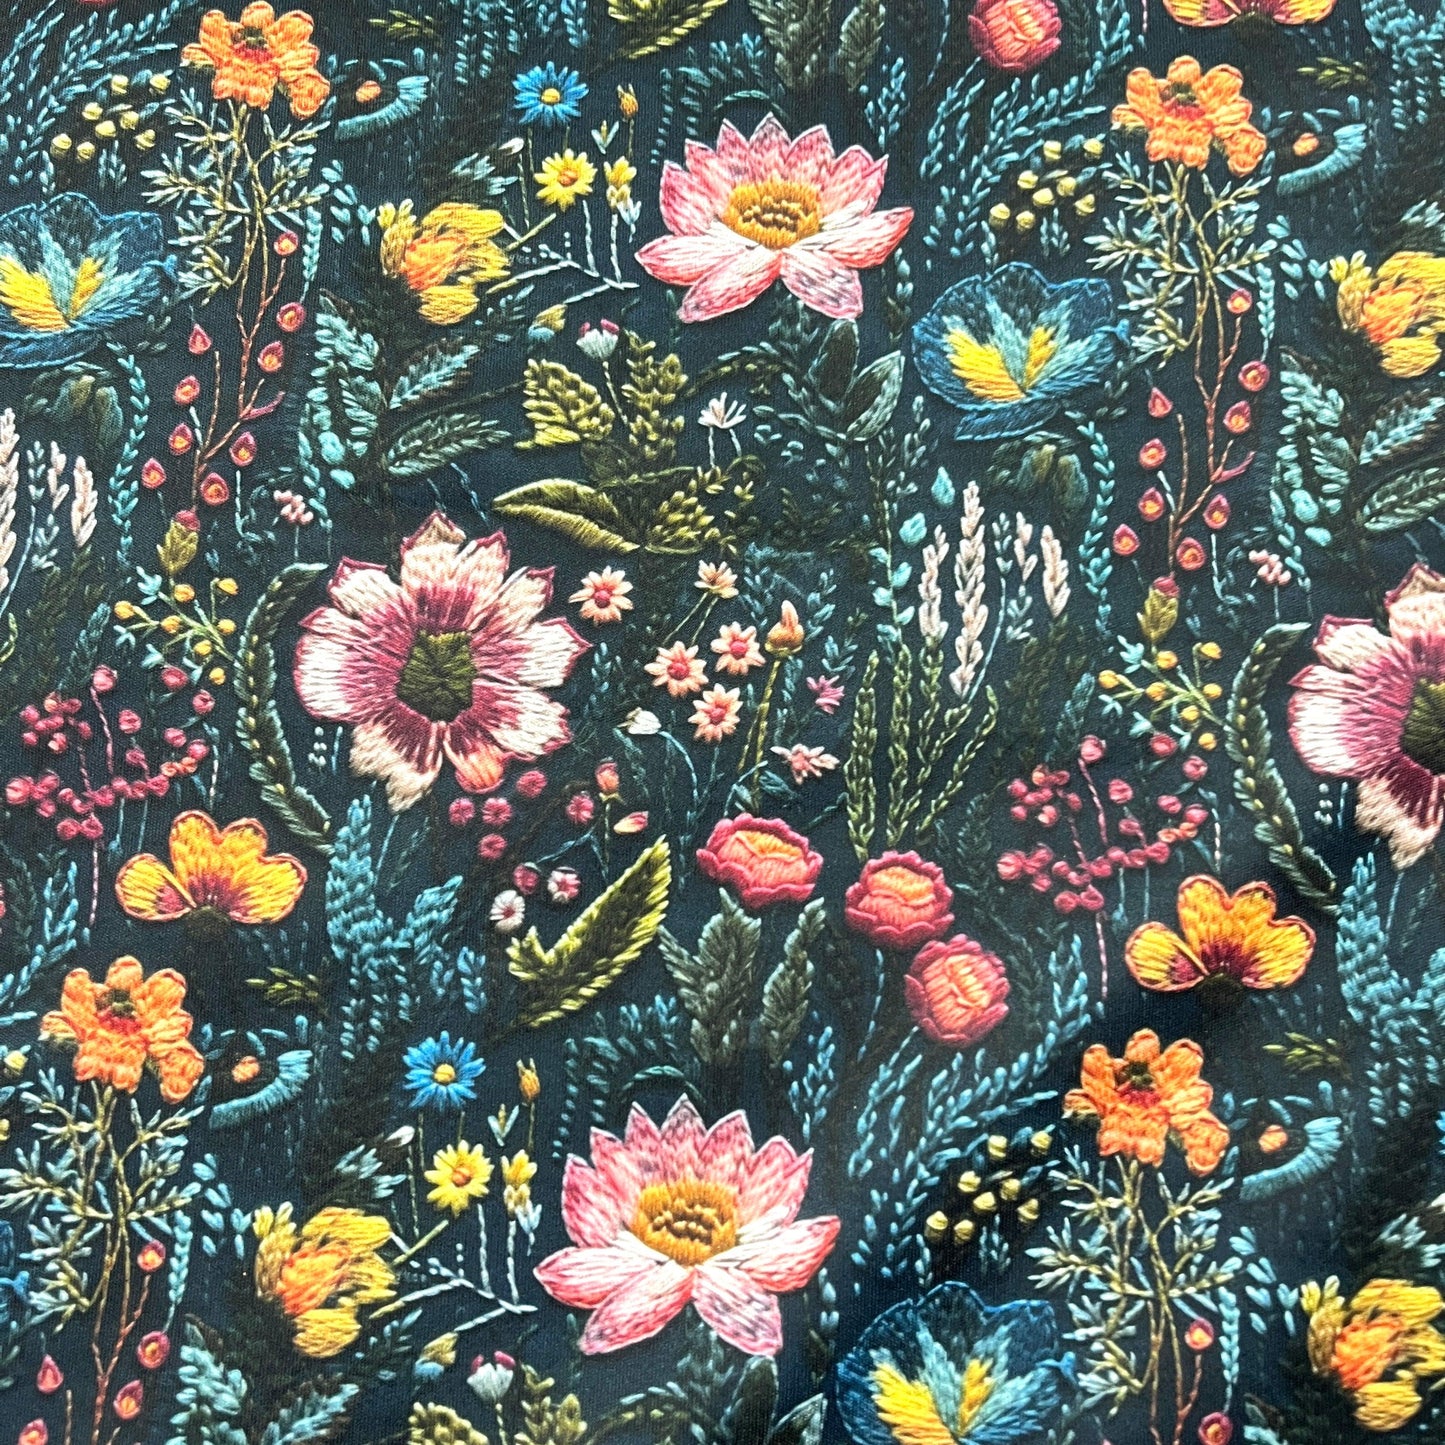 Embroidered Flower Garden 1 mil PUL Fabric - Made in the USA - Nature's Fabrics